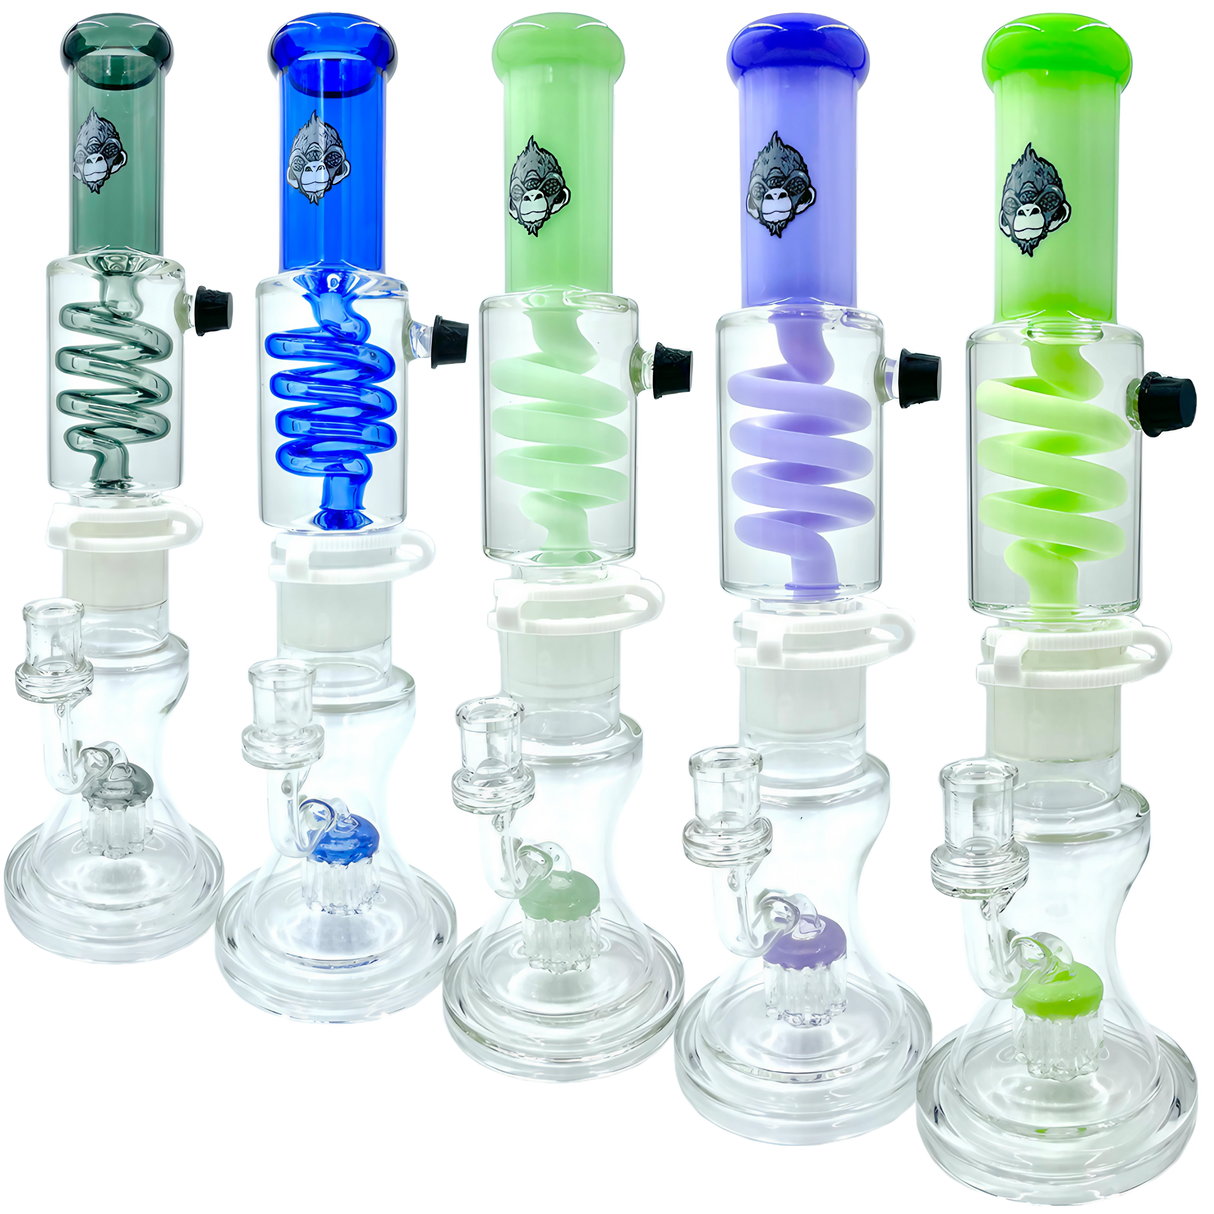 AFM Tree Perc Head Freezable Coil Bongs in various colors, 14" tall with clear straight design